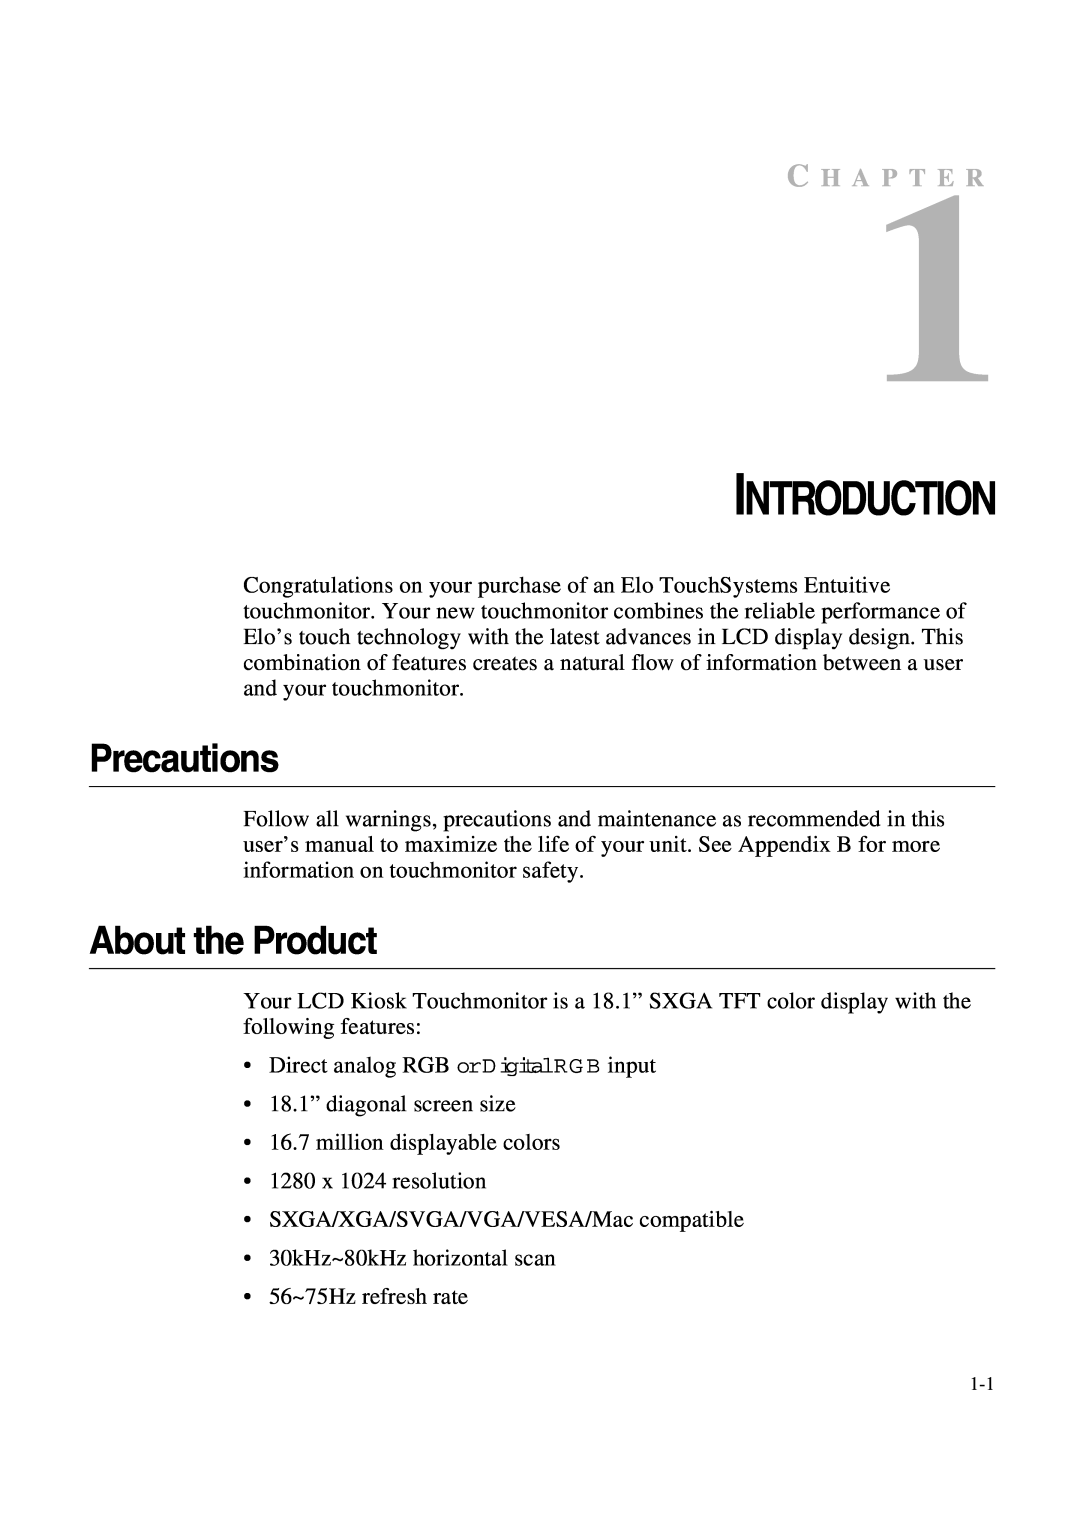 Tyco 1847L Series manual Precautions, About the Product, C H A P T E R, Introduction 